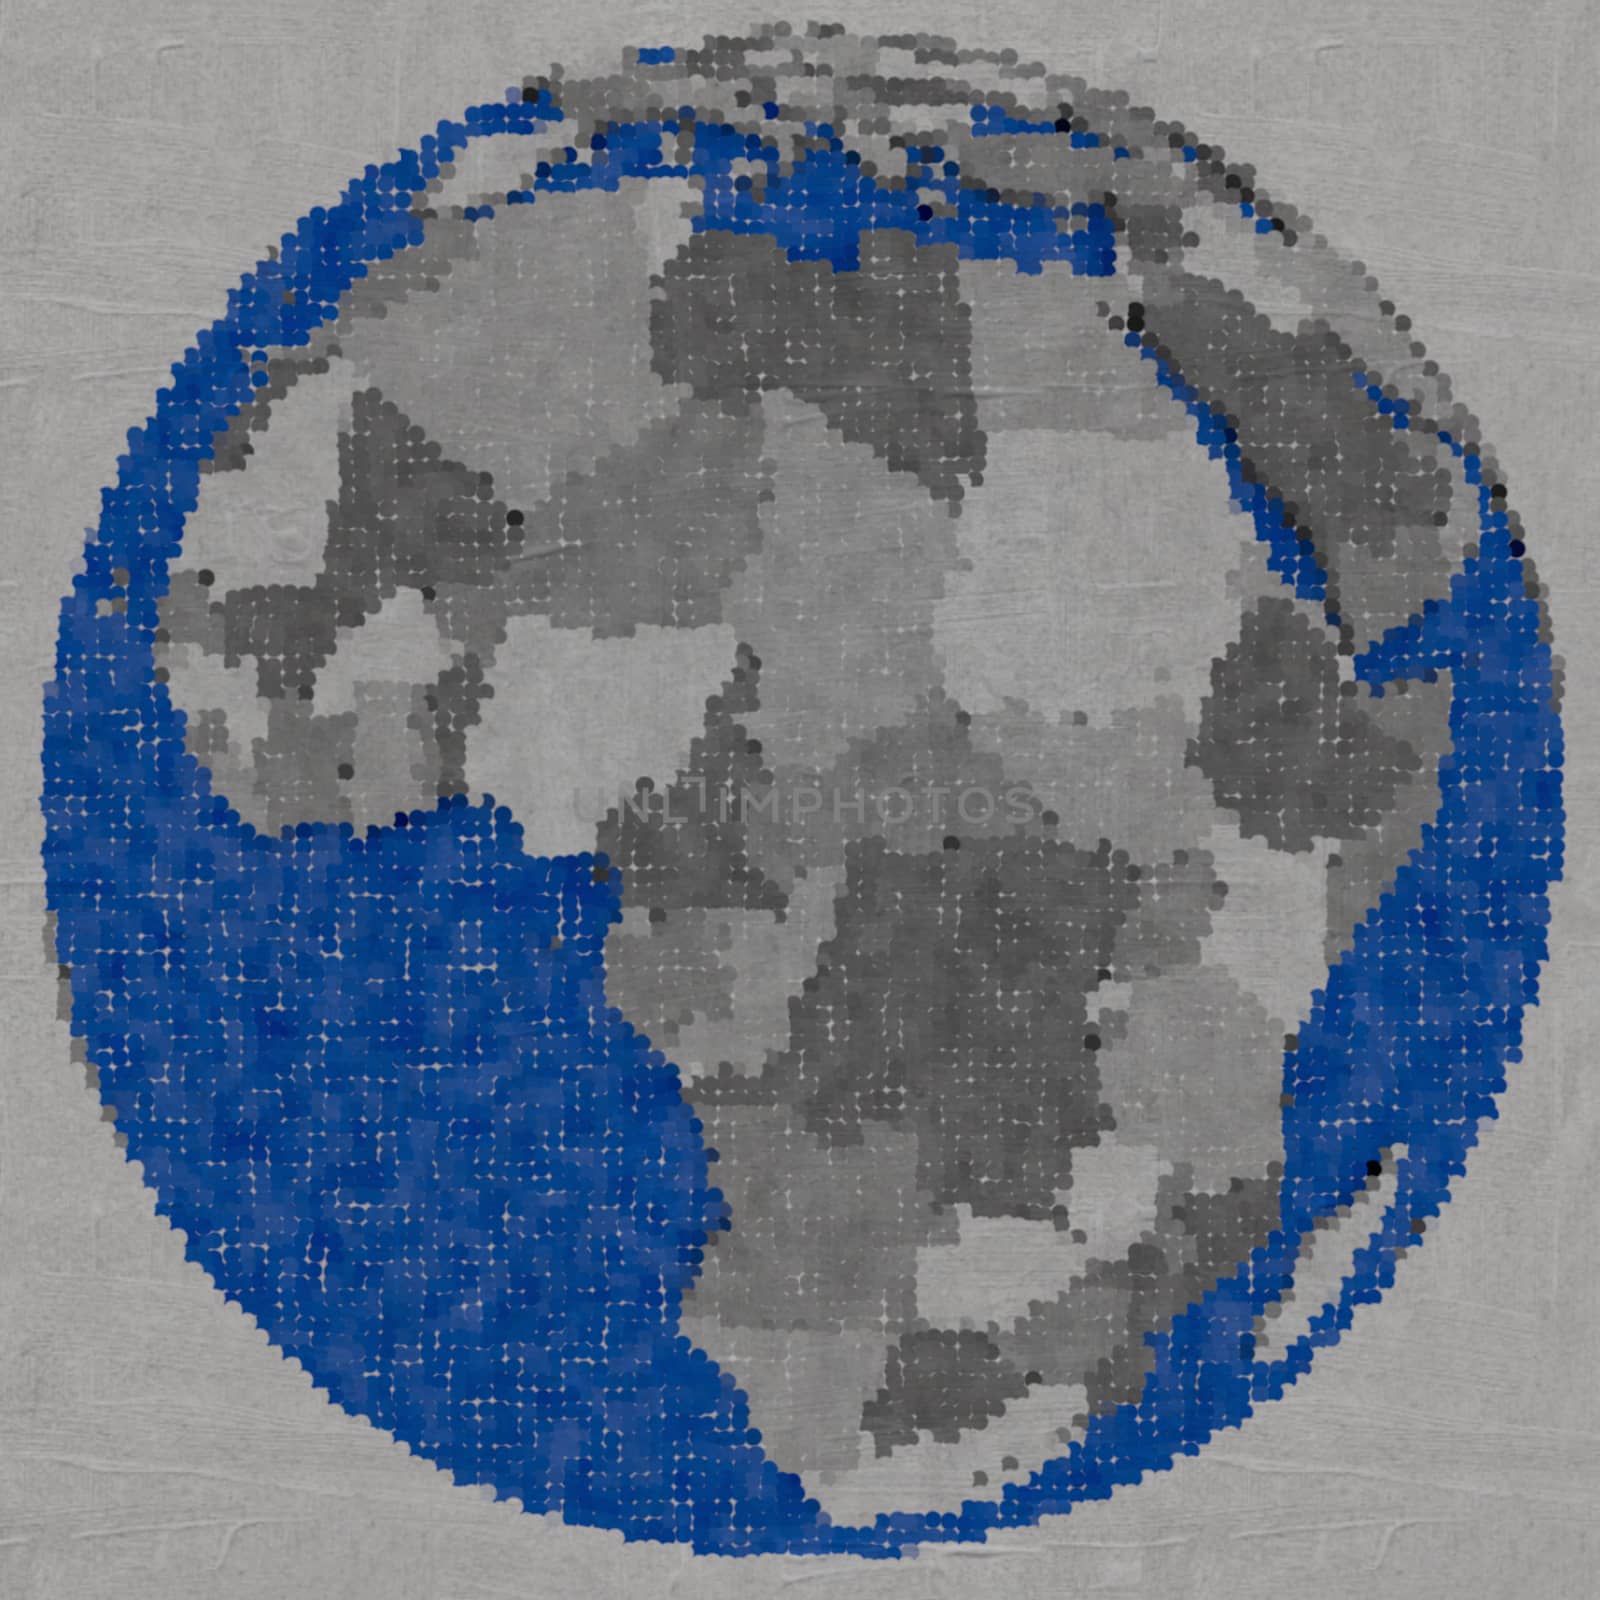 Drawing of Africa on globe, dotted illustration